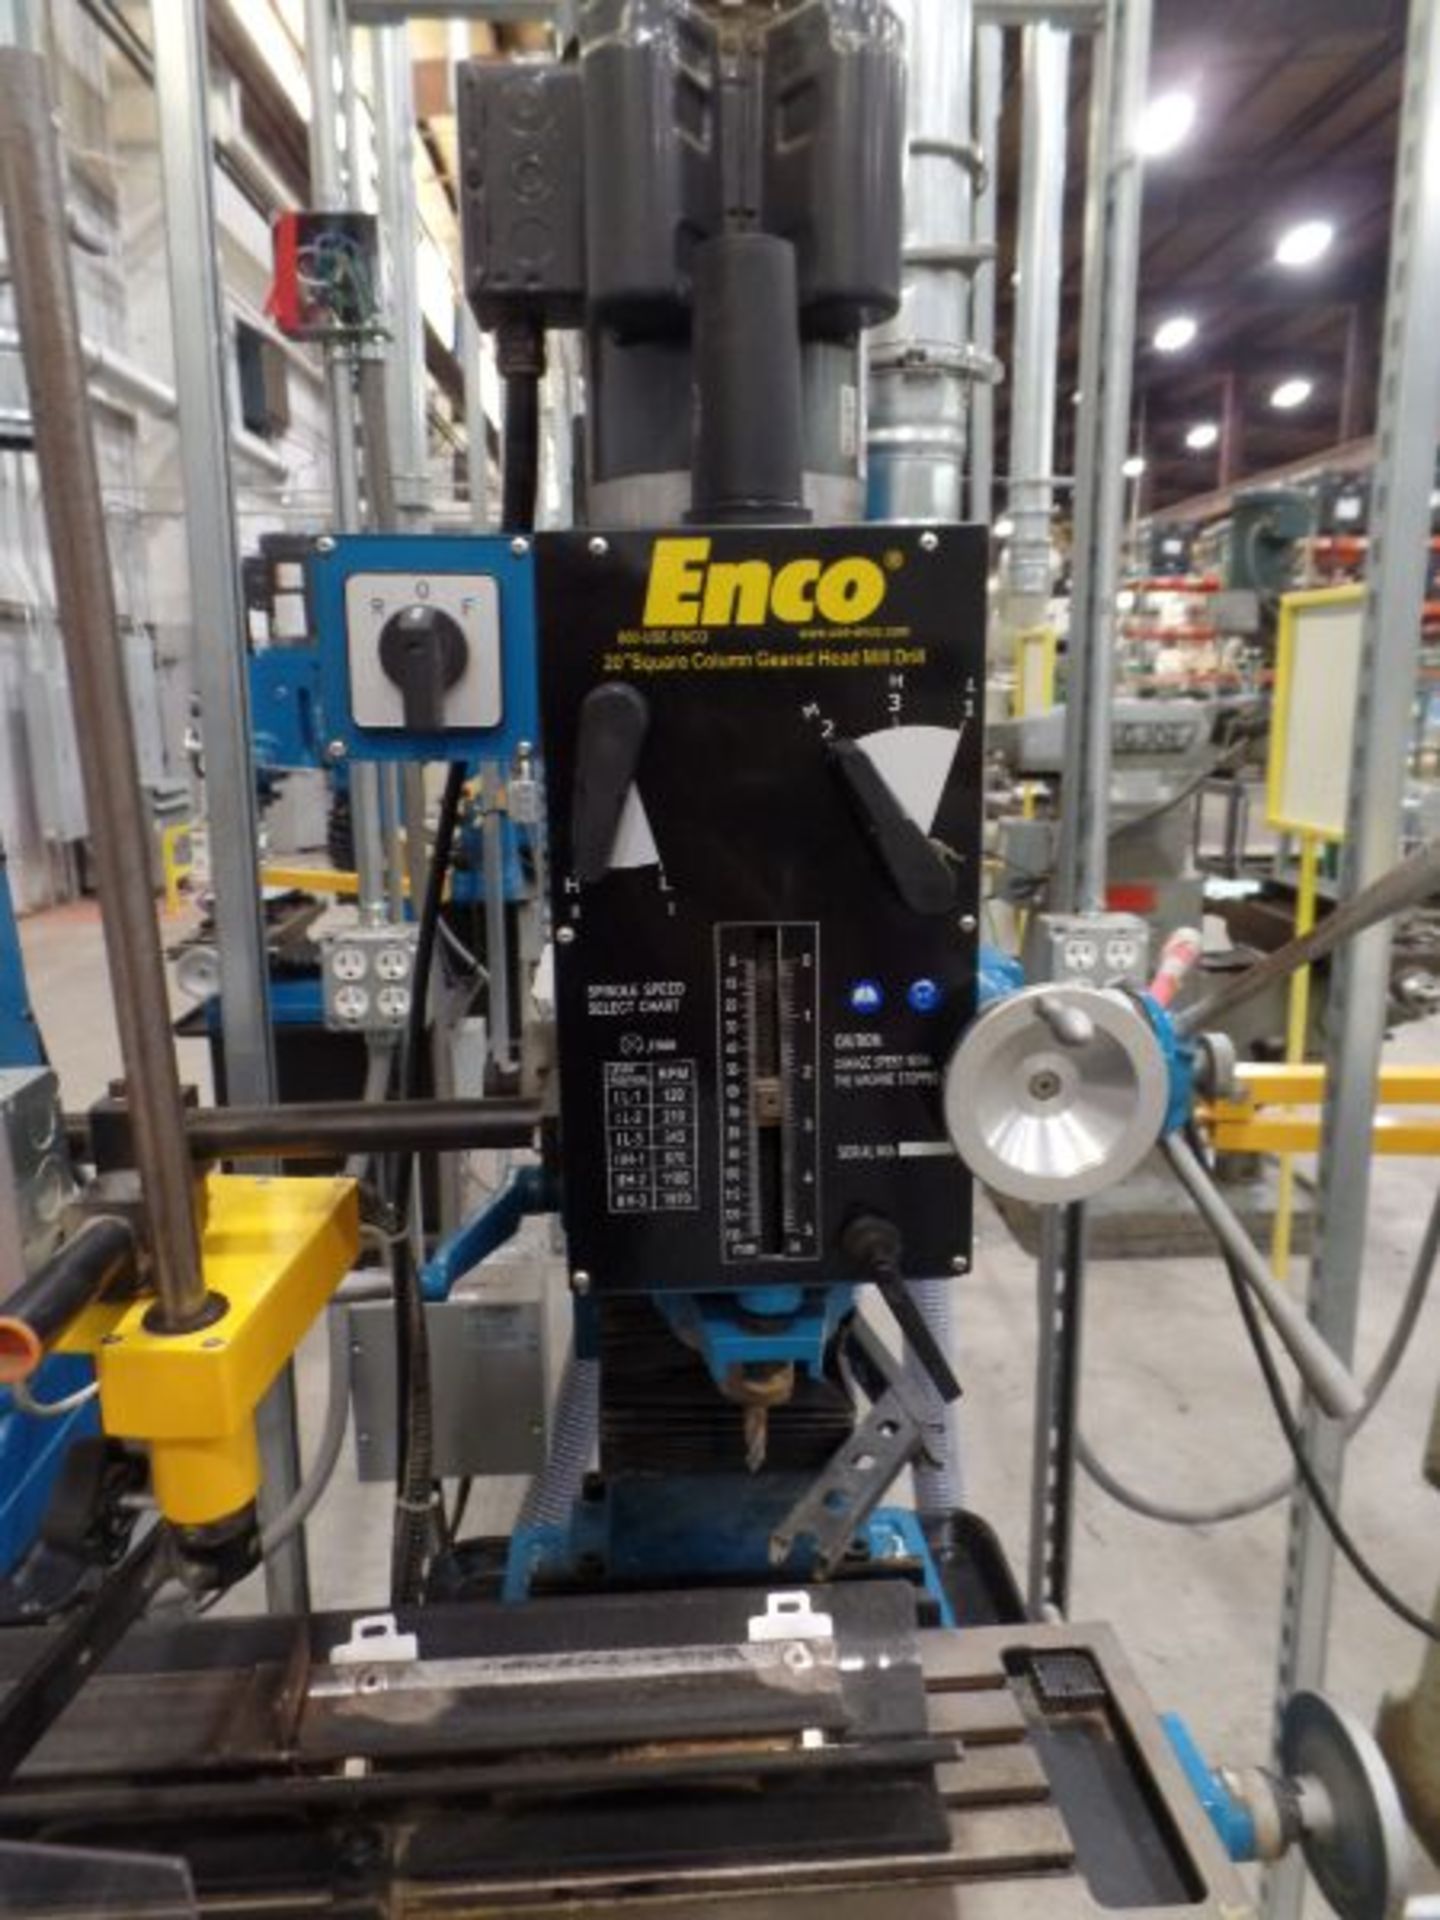 Enco 405-0593 20" Square Column Geared Head Mill, 9" x 31" Table, s/n 24041805049, New 2018 - Image 3 of 5